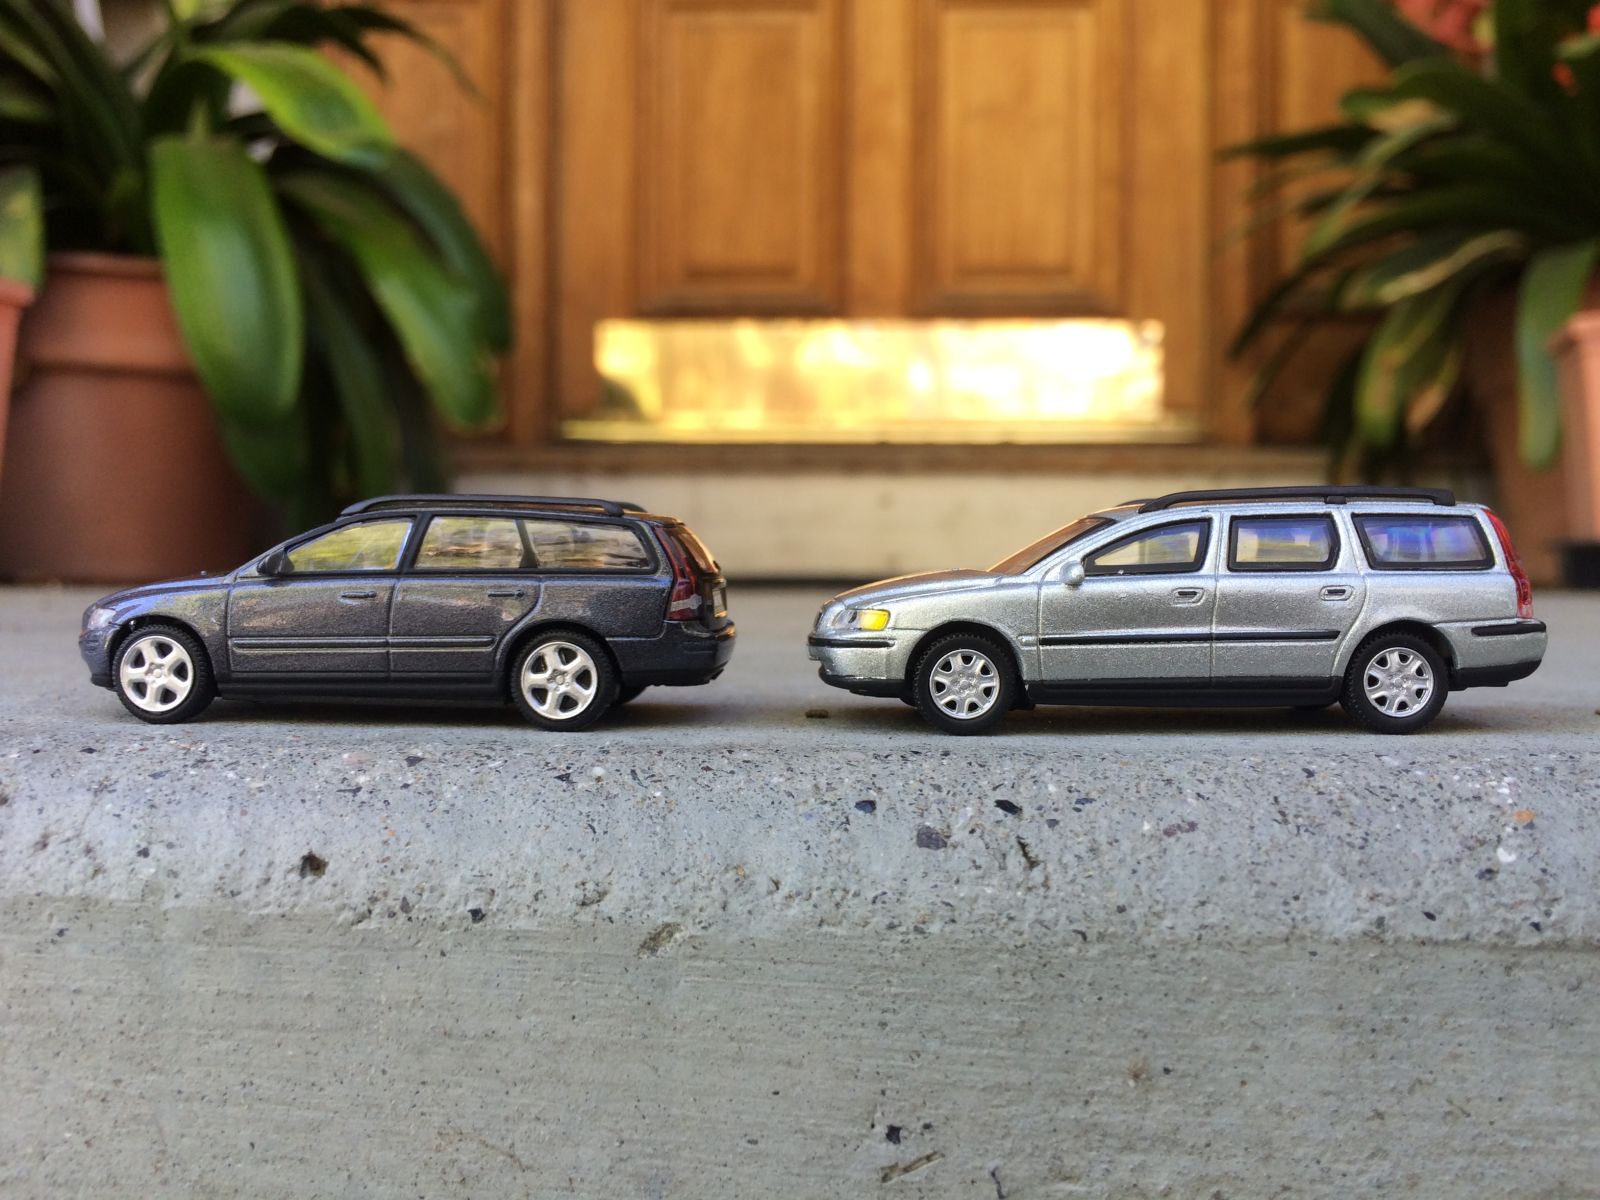 Illustration for article titled Swedish Saturday: Volvos Big and Little!